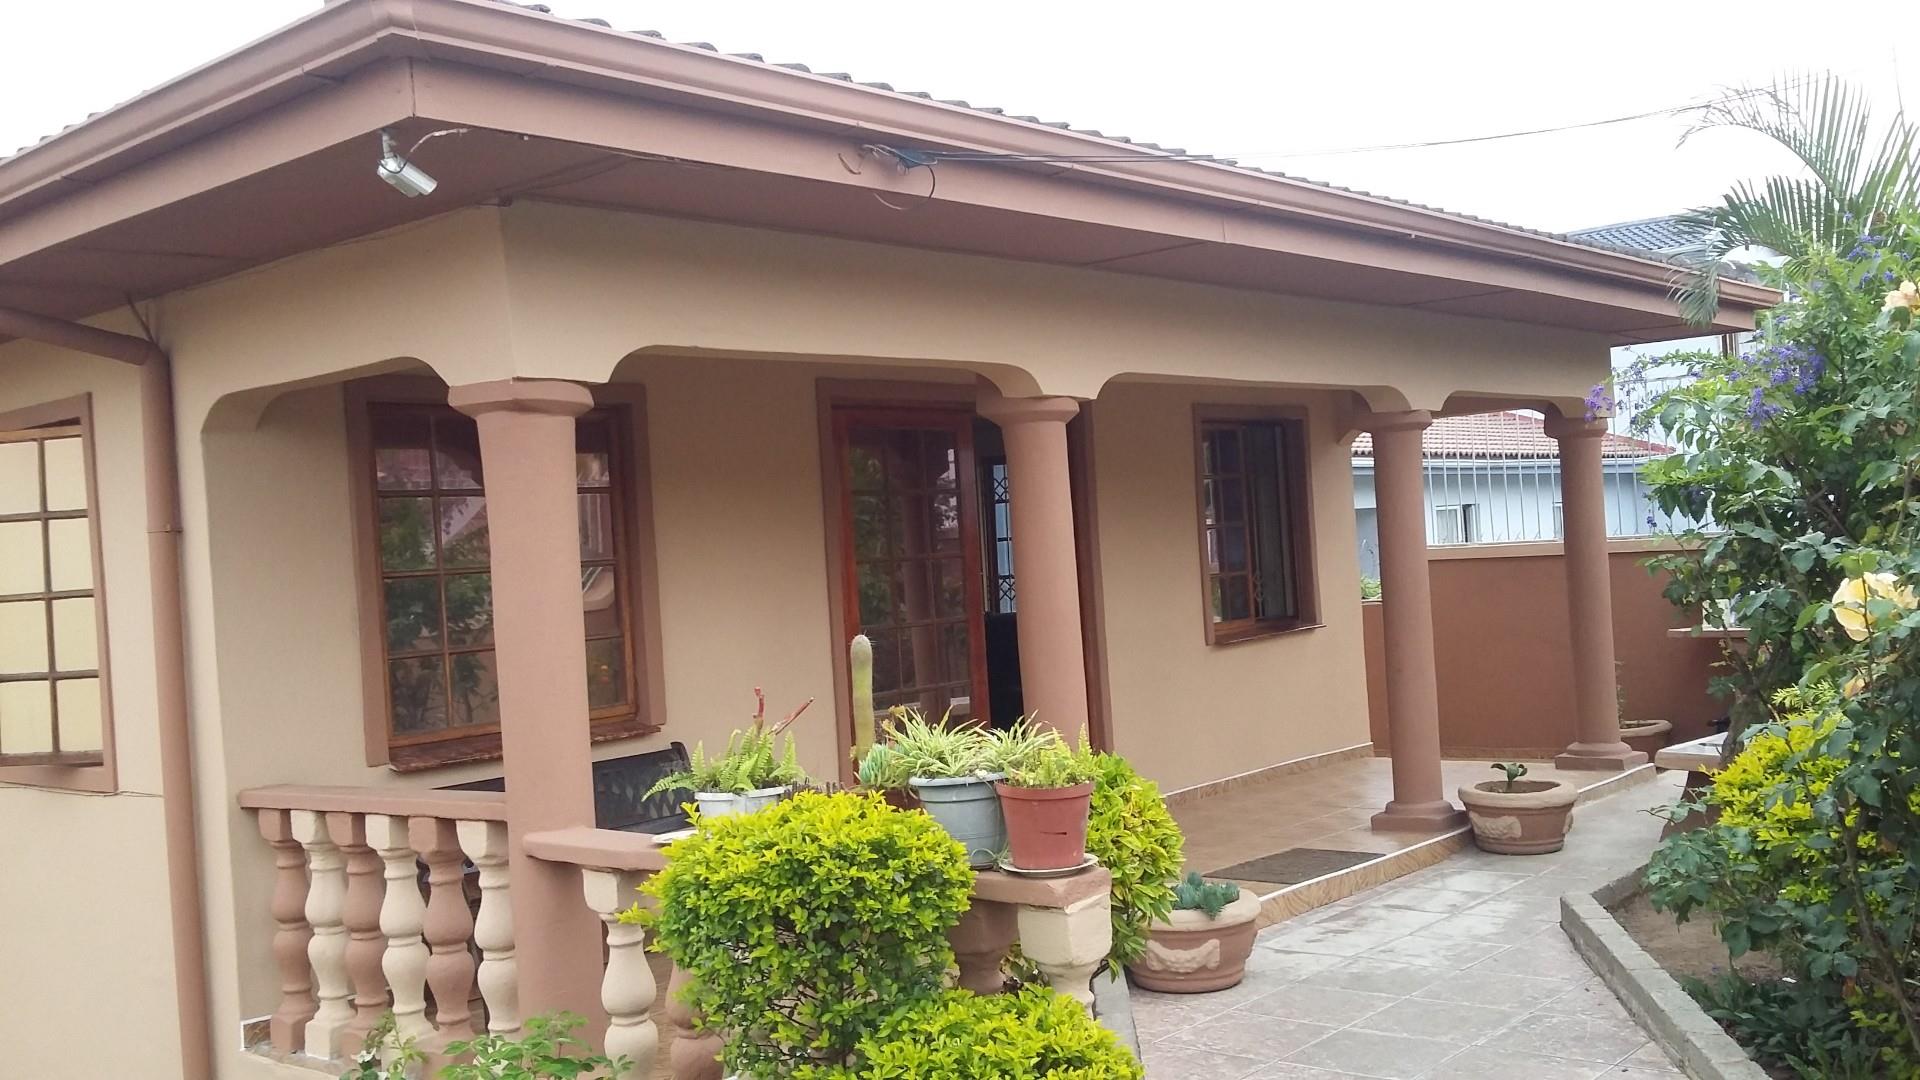 3 Bedroom House For Sale in Newlands West | RE/MAX™ of Southern Africa